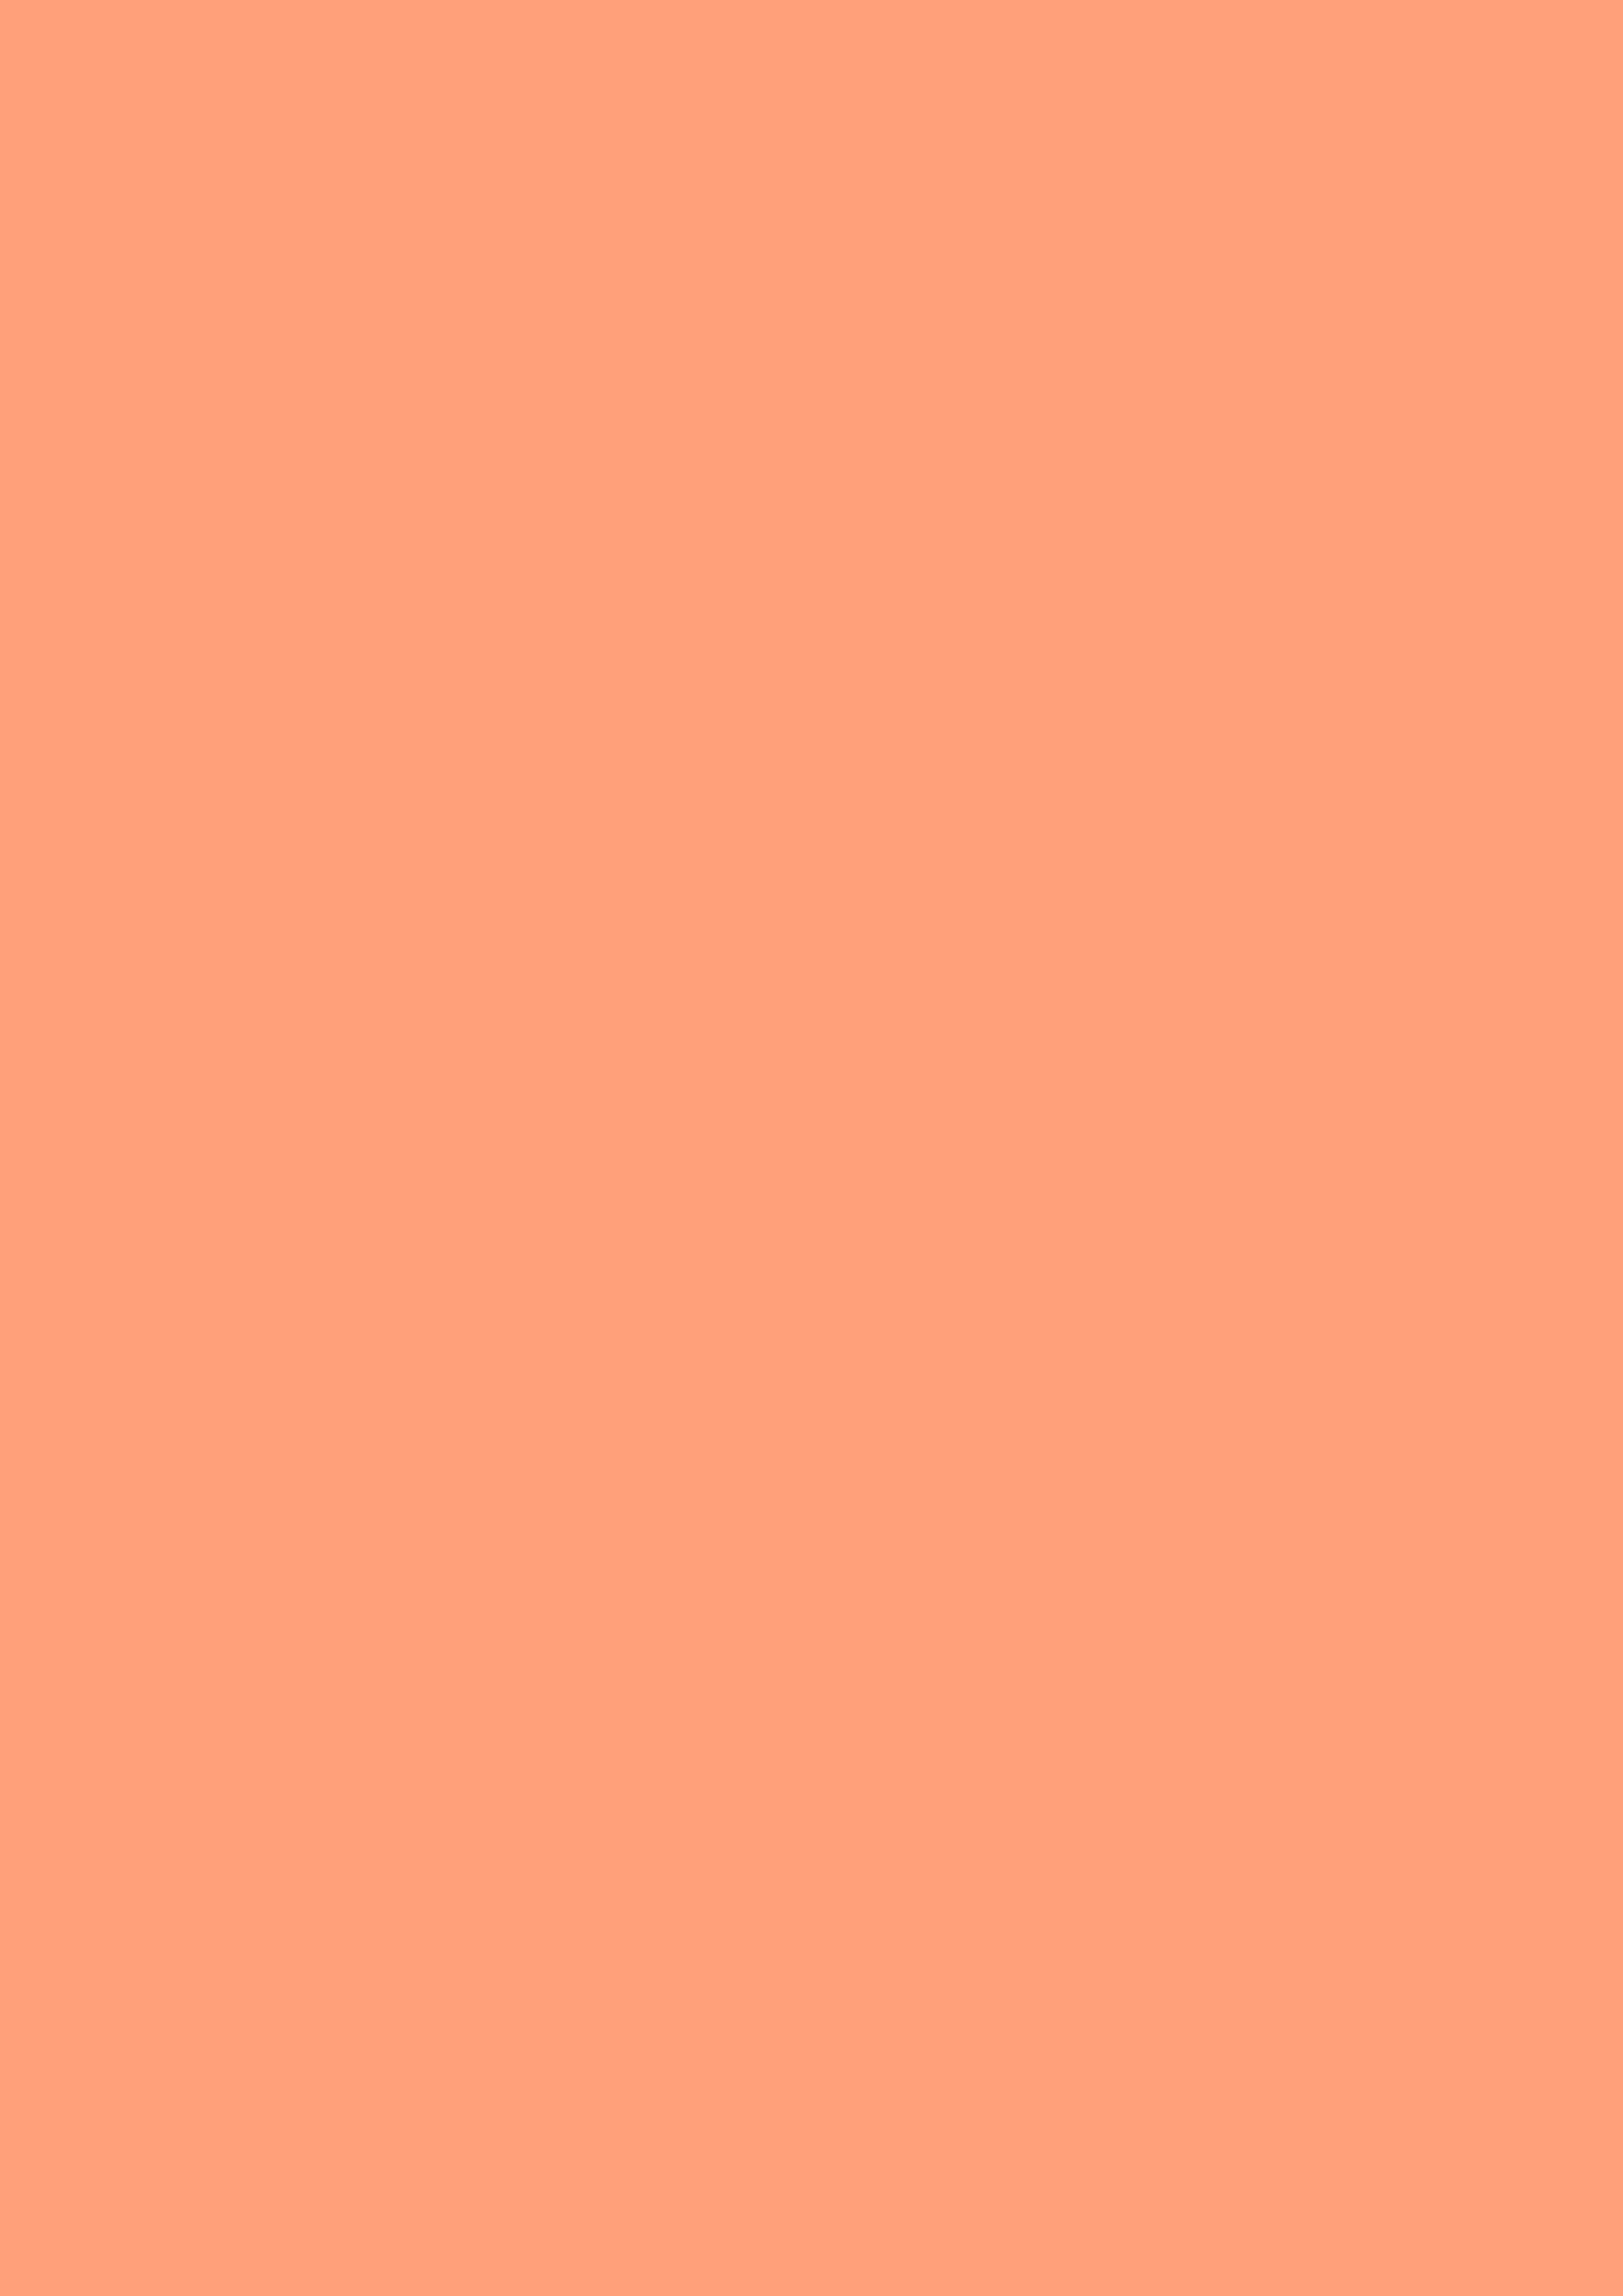 2480x3508 Light Salmon Solid Color Background